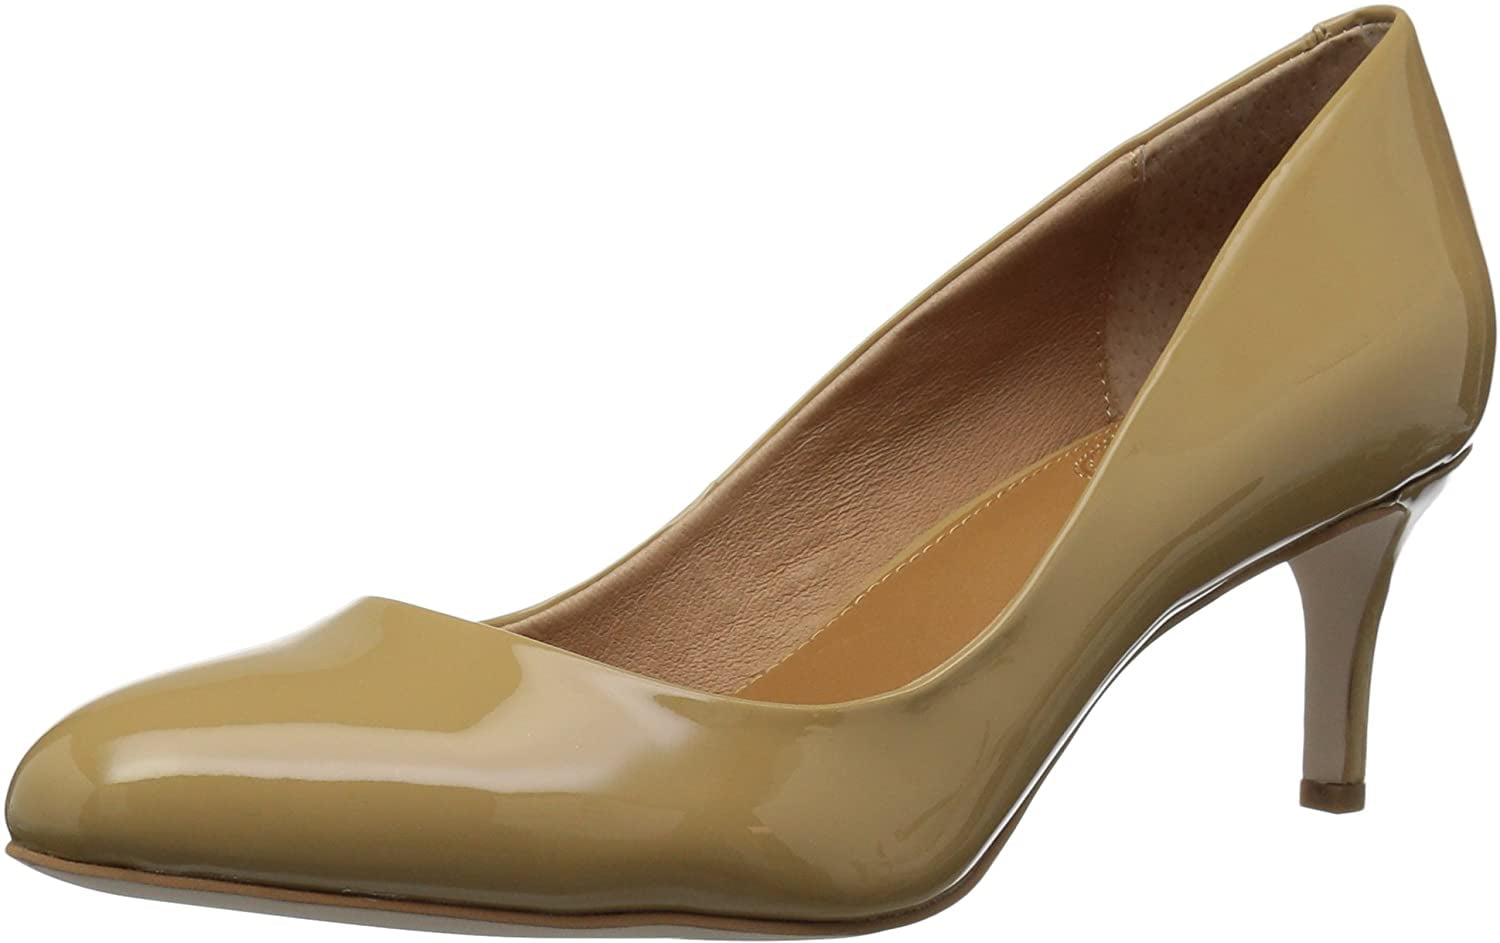 New In Box Womens Corso Como Linden Beige Patent Leather Pumps Heels Shoes